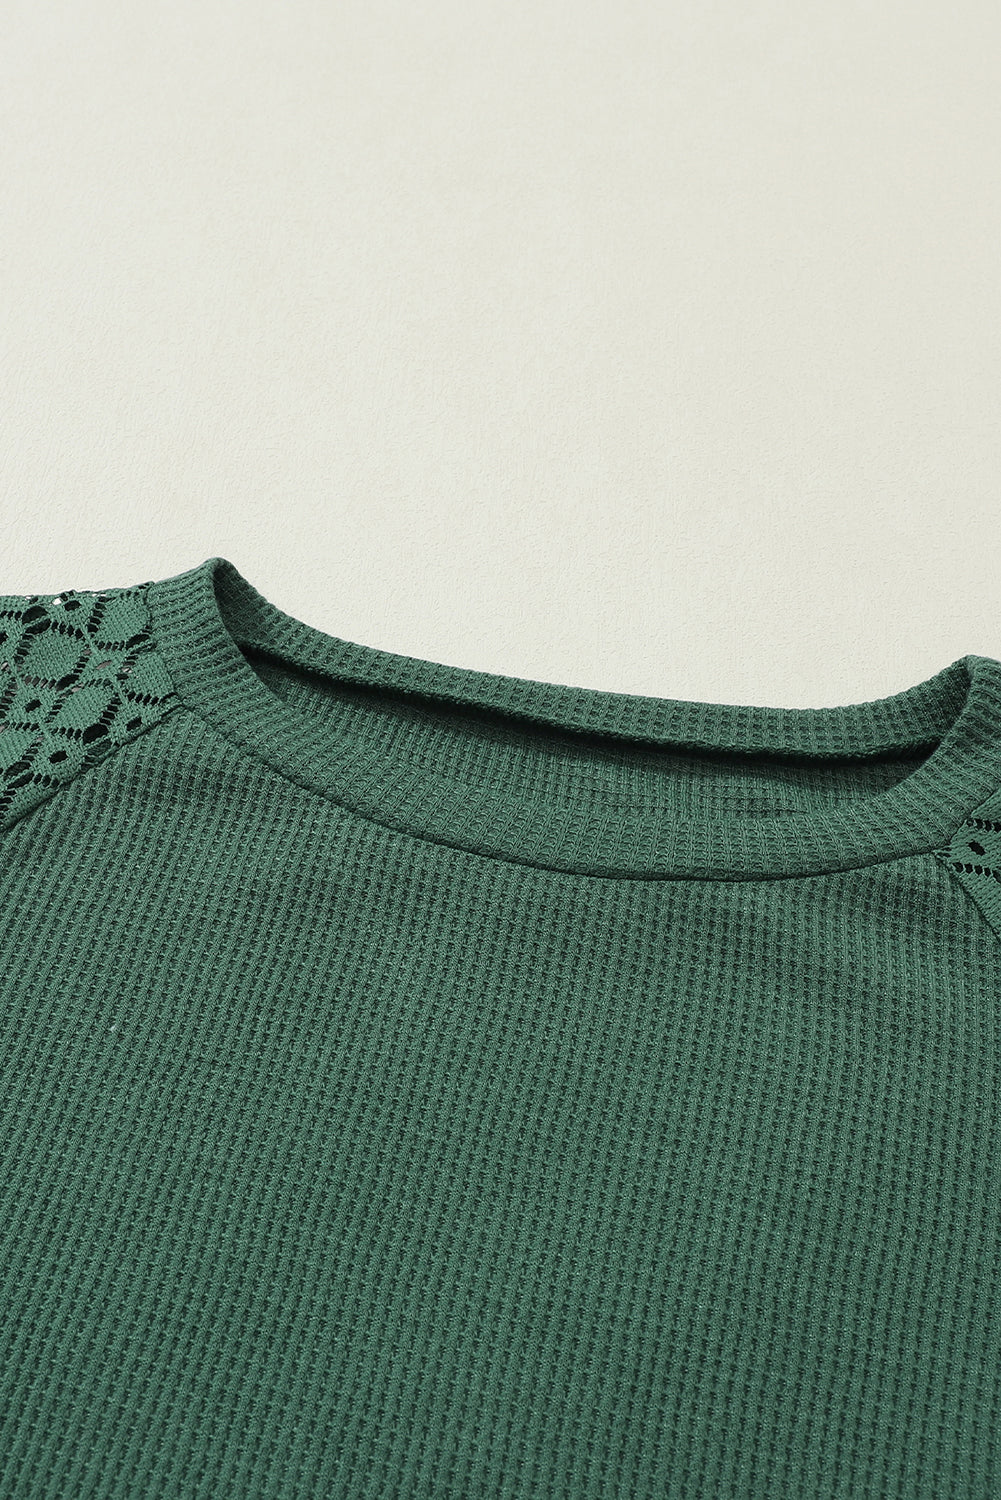 Green Lace Long Sleeve Textured Pullover